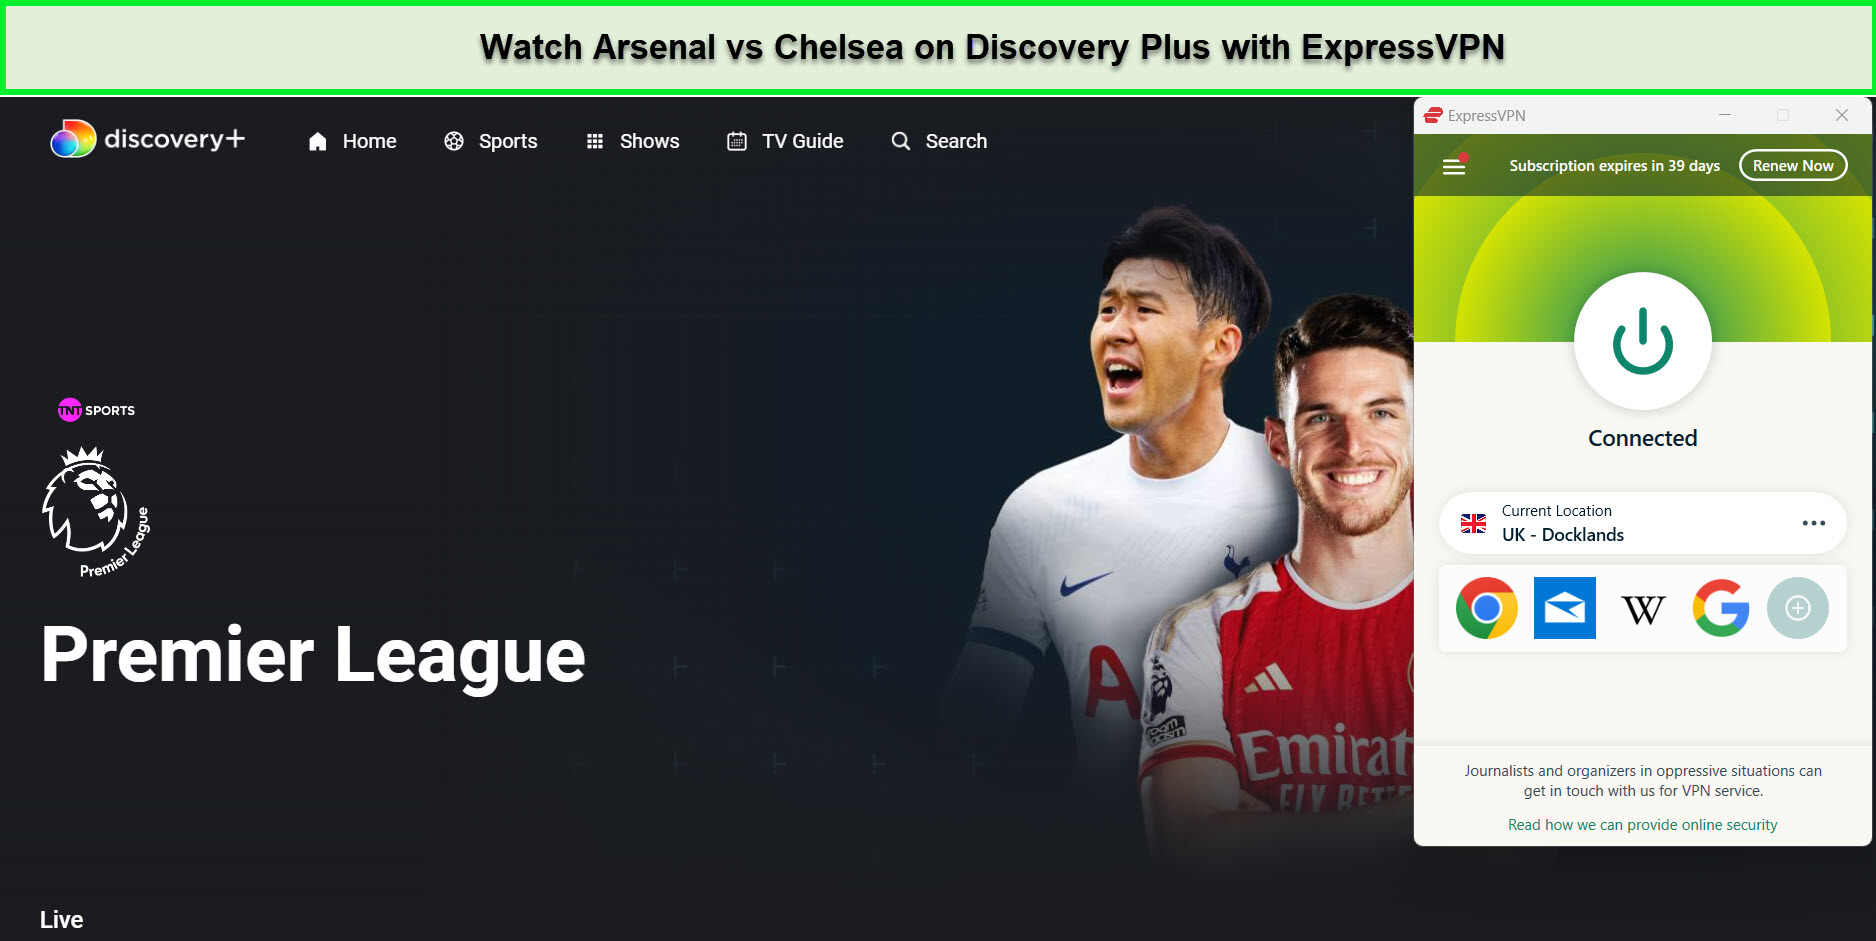 Watch-Arsenal-vs-Chelsea-in-France-on-Discovery-Plus-with-ExpressVPN